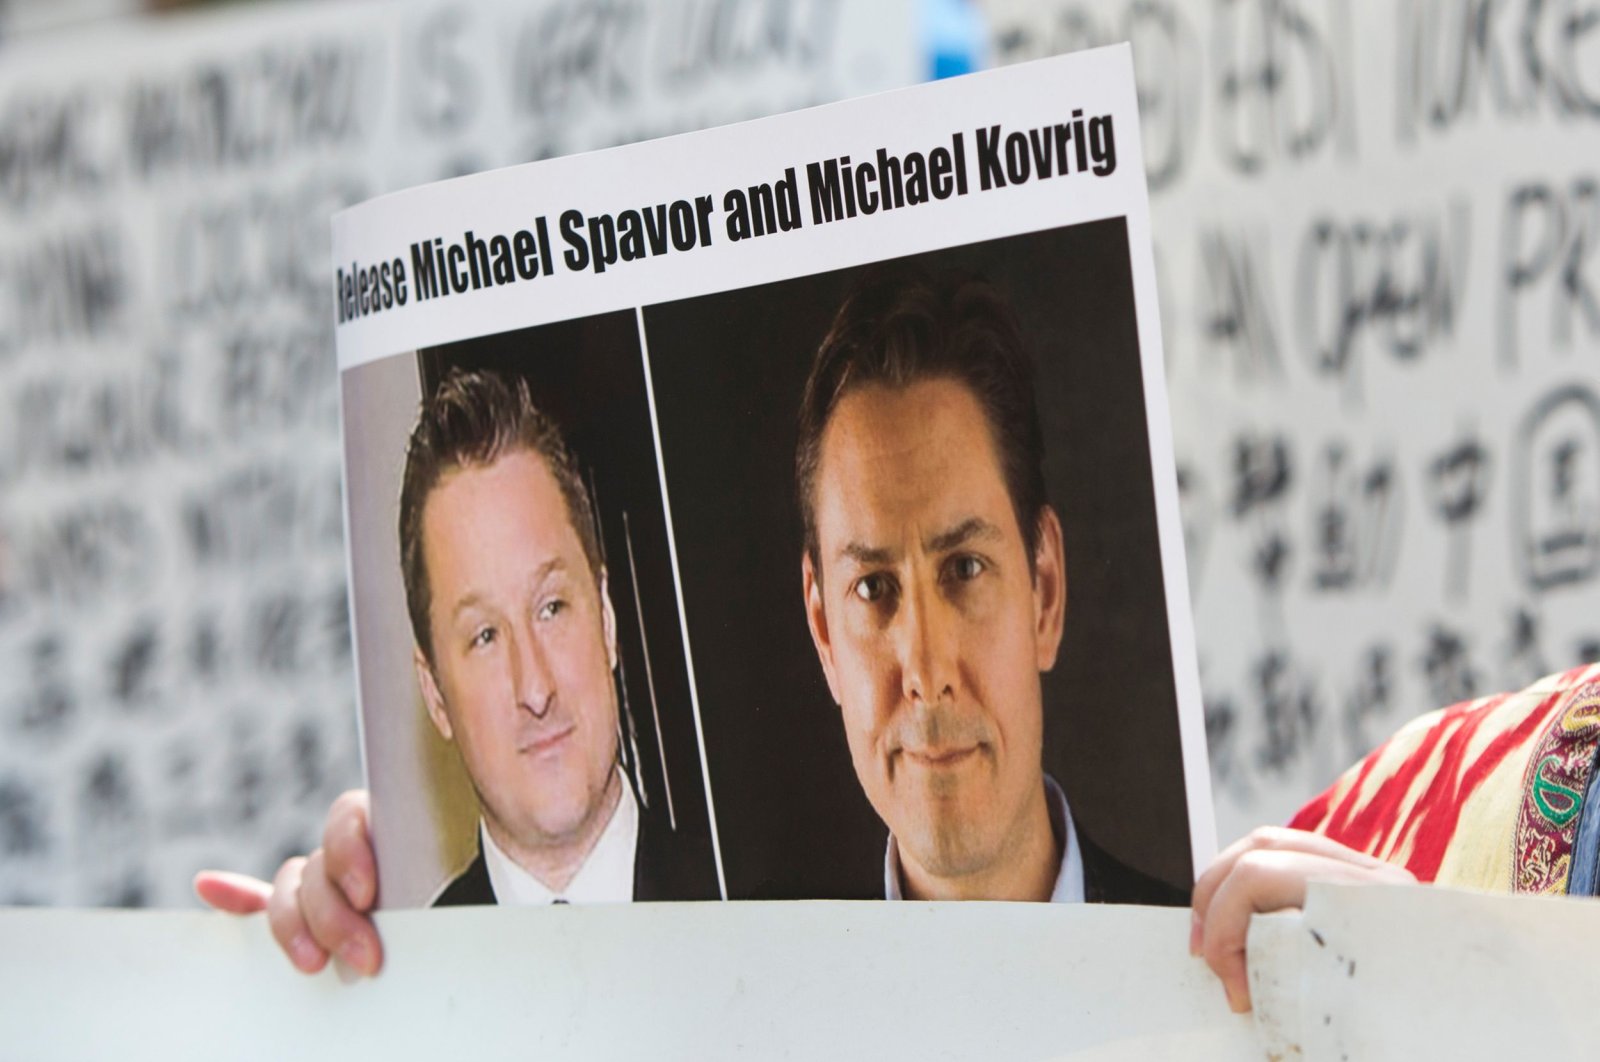 In this May 8, 2019, file photo, a protester holds up a placard depicting detained Canadians Michael Spavor, left, and Michael Kovrig outside a court during a hearing for Huawei Chief Financial Officer, Meng Wanzhou at the British Columbia Supreme Court in Vancouver, Canada. (AFP Photo)